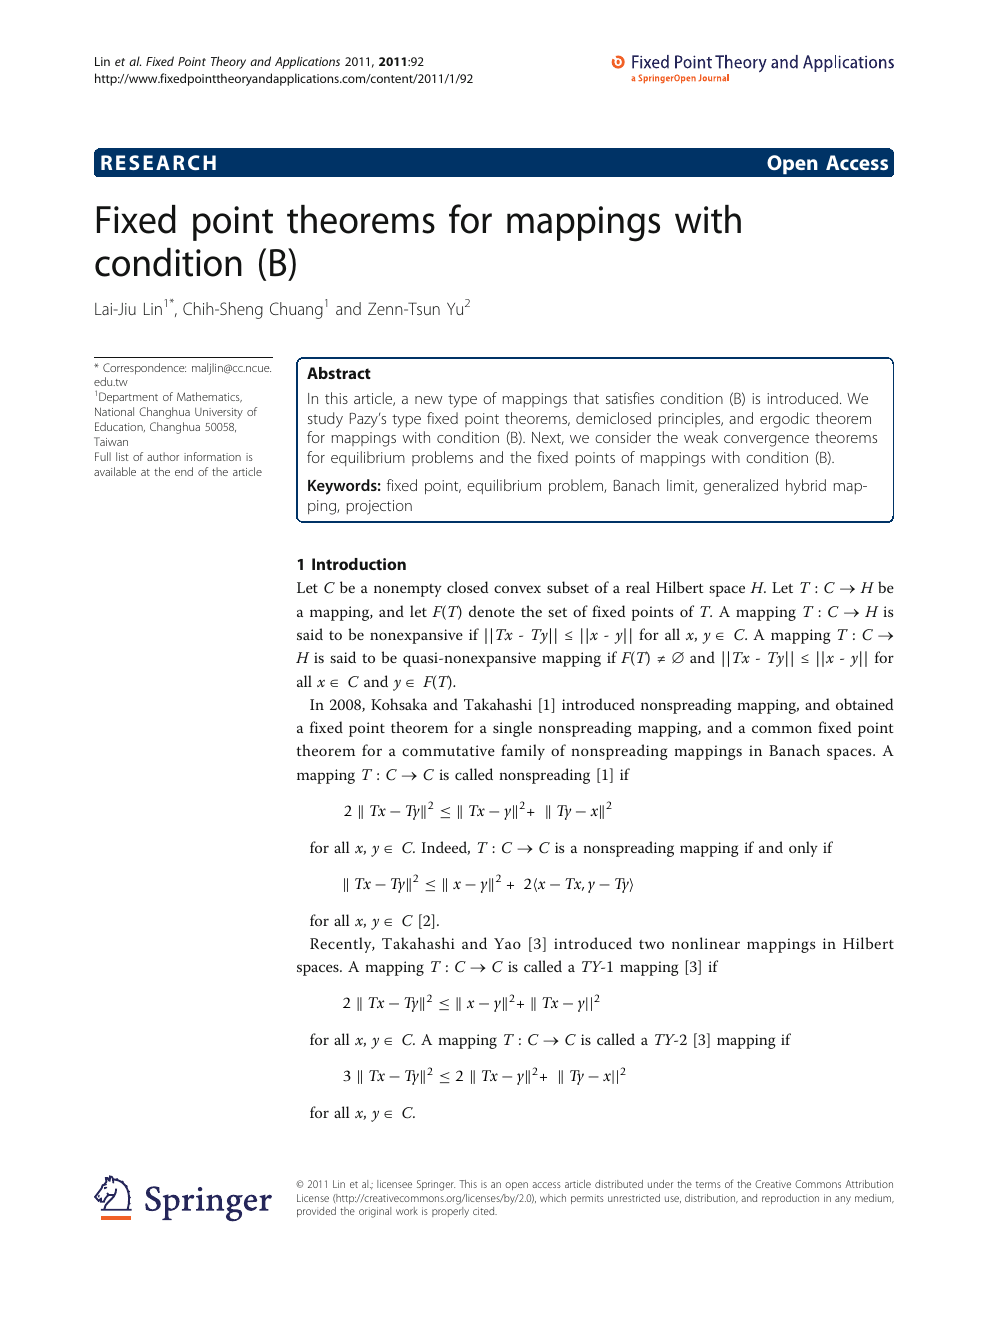 Fixed Point Theorems For Mappings With Condition B Topic Of Research Paper In Mathematics Download Scholarly Article Pdf And Read For Free On Cyberleninka Open Science Hub